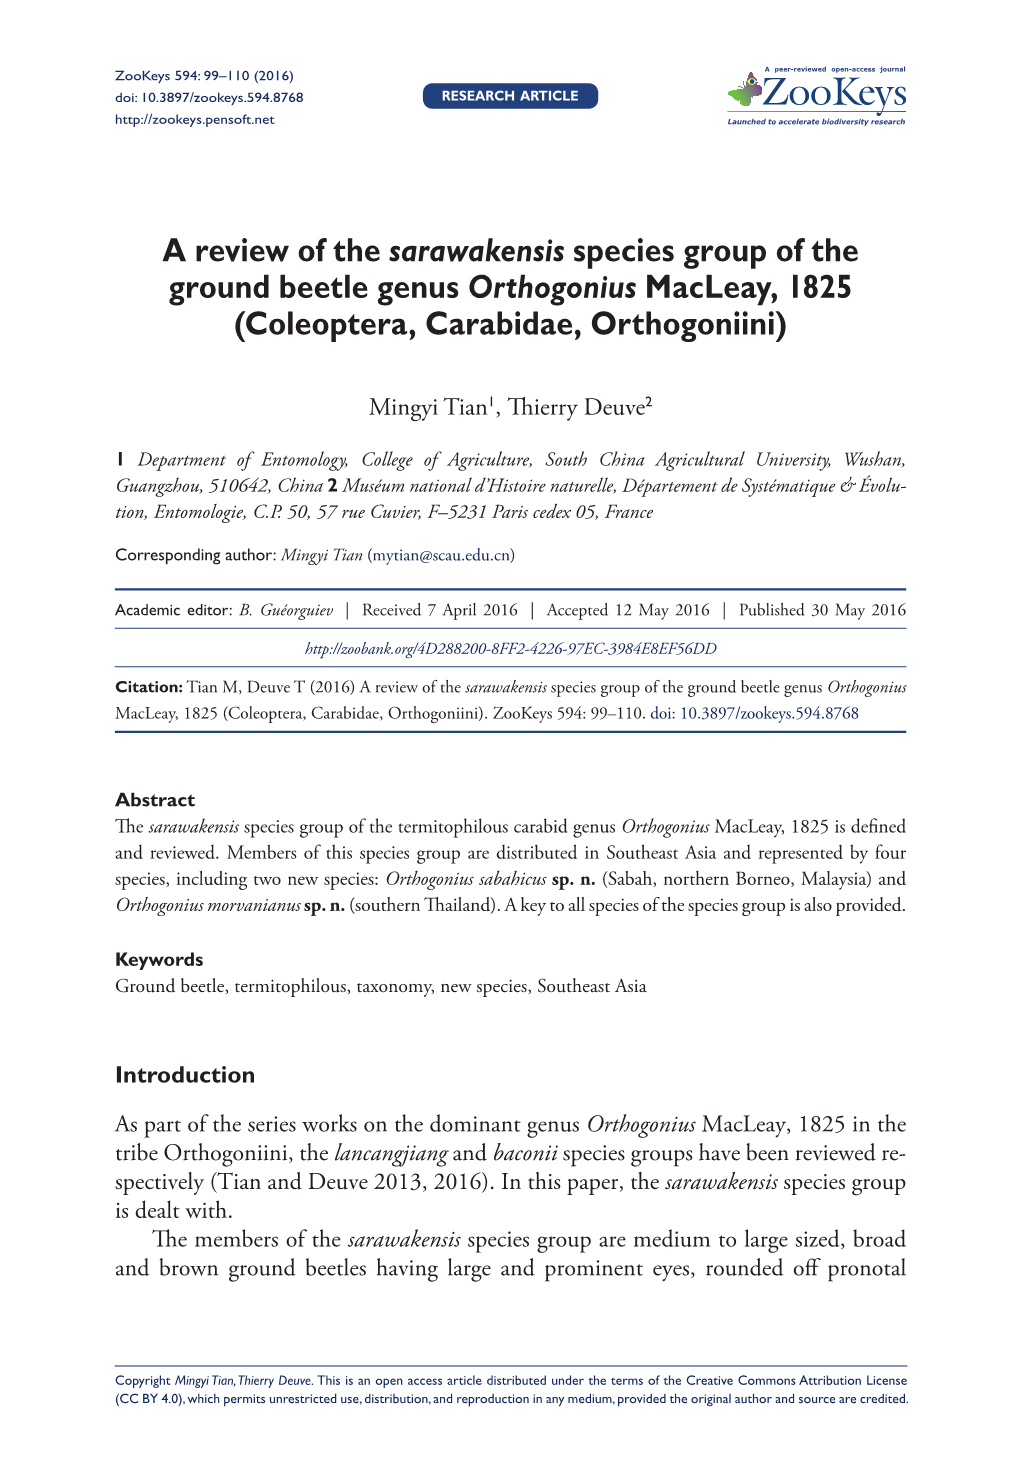 ﻿A Review of the Sarawakensis Species Group of the Ground Beetle Genus